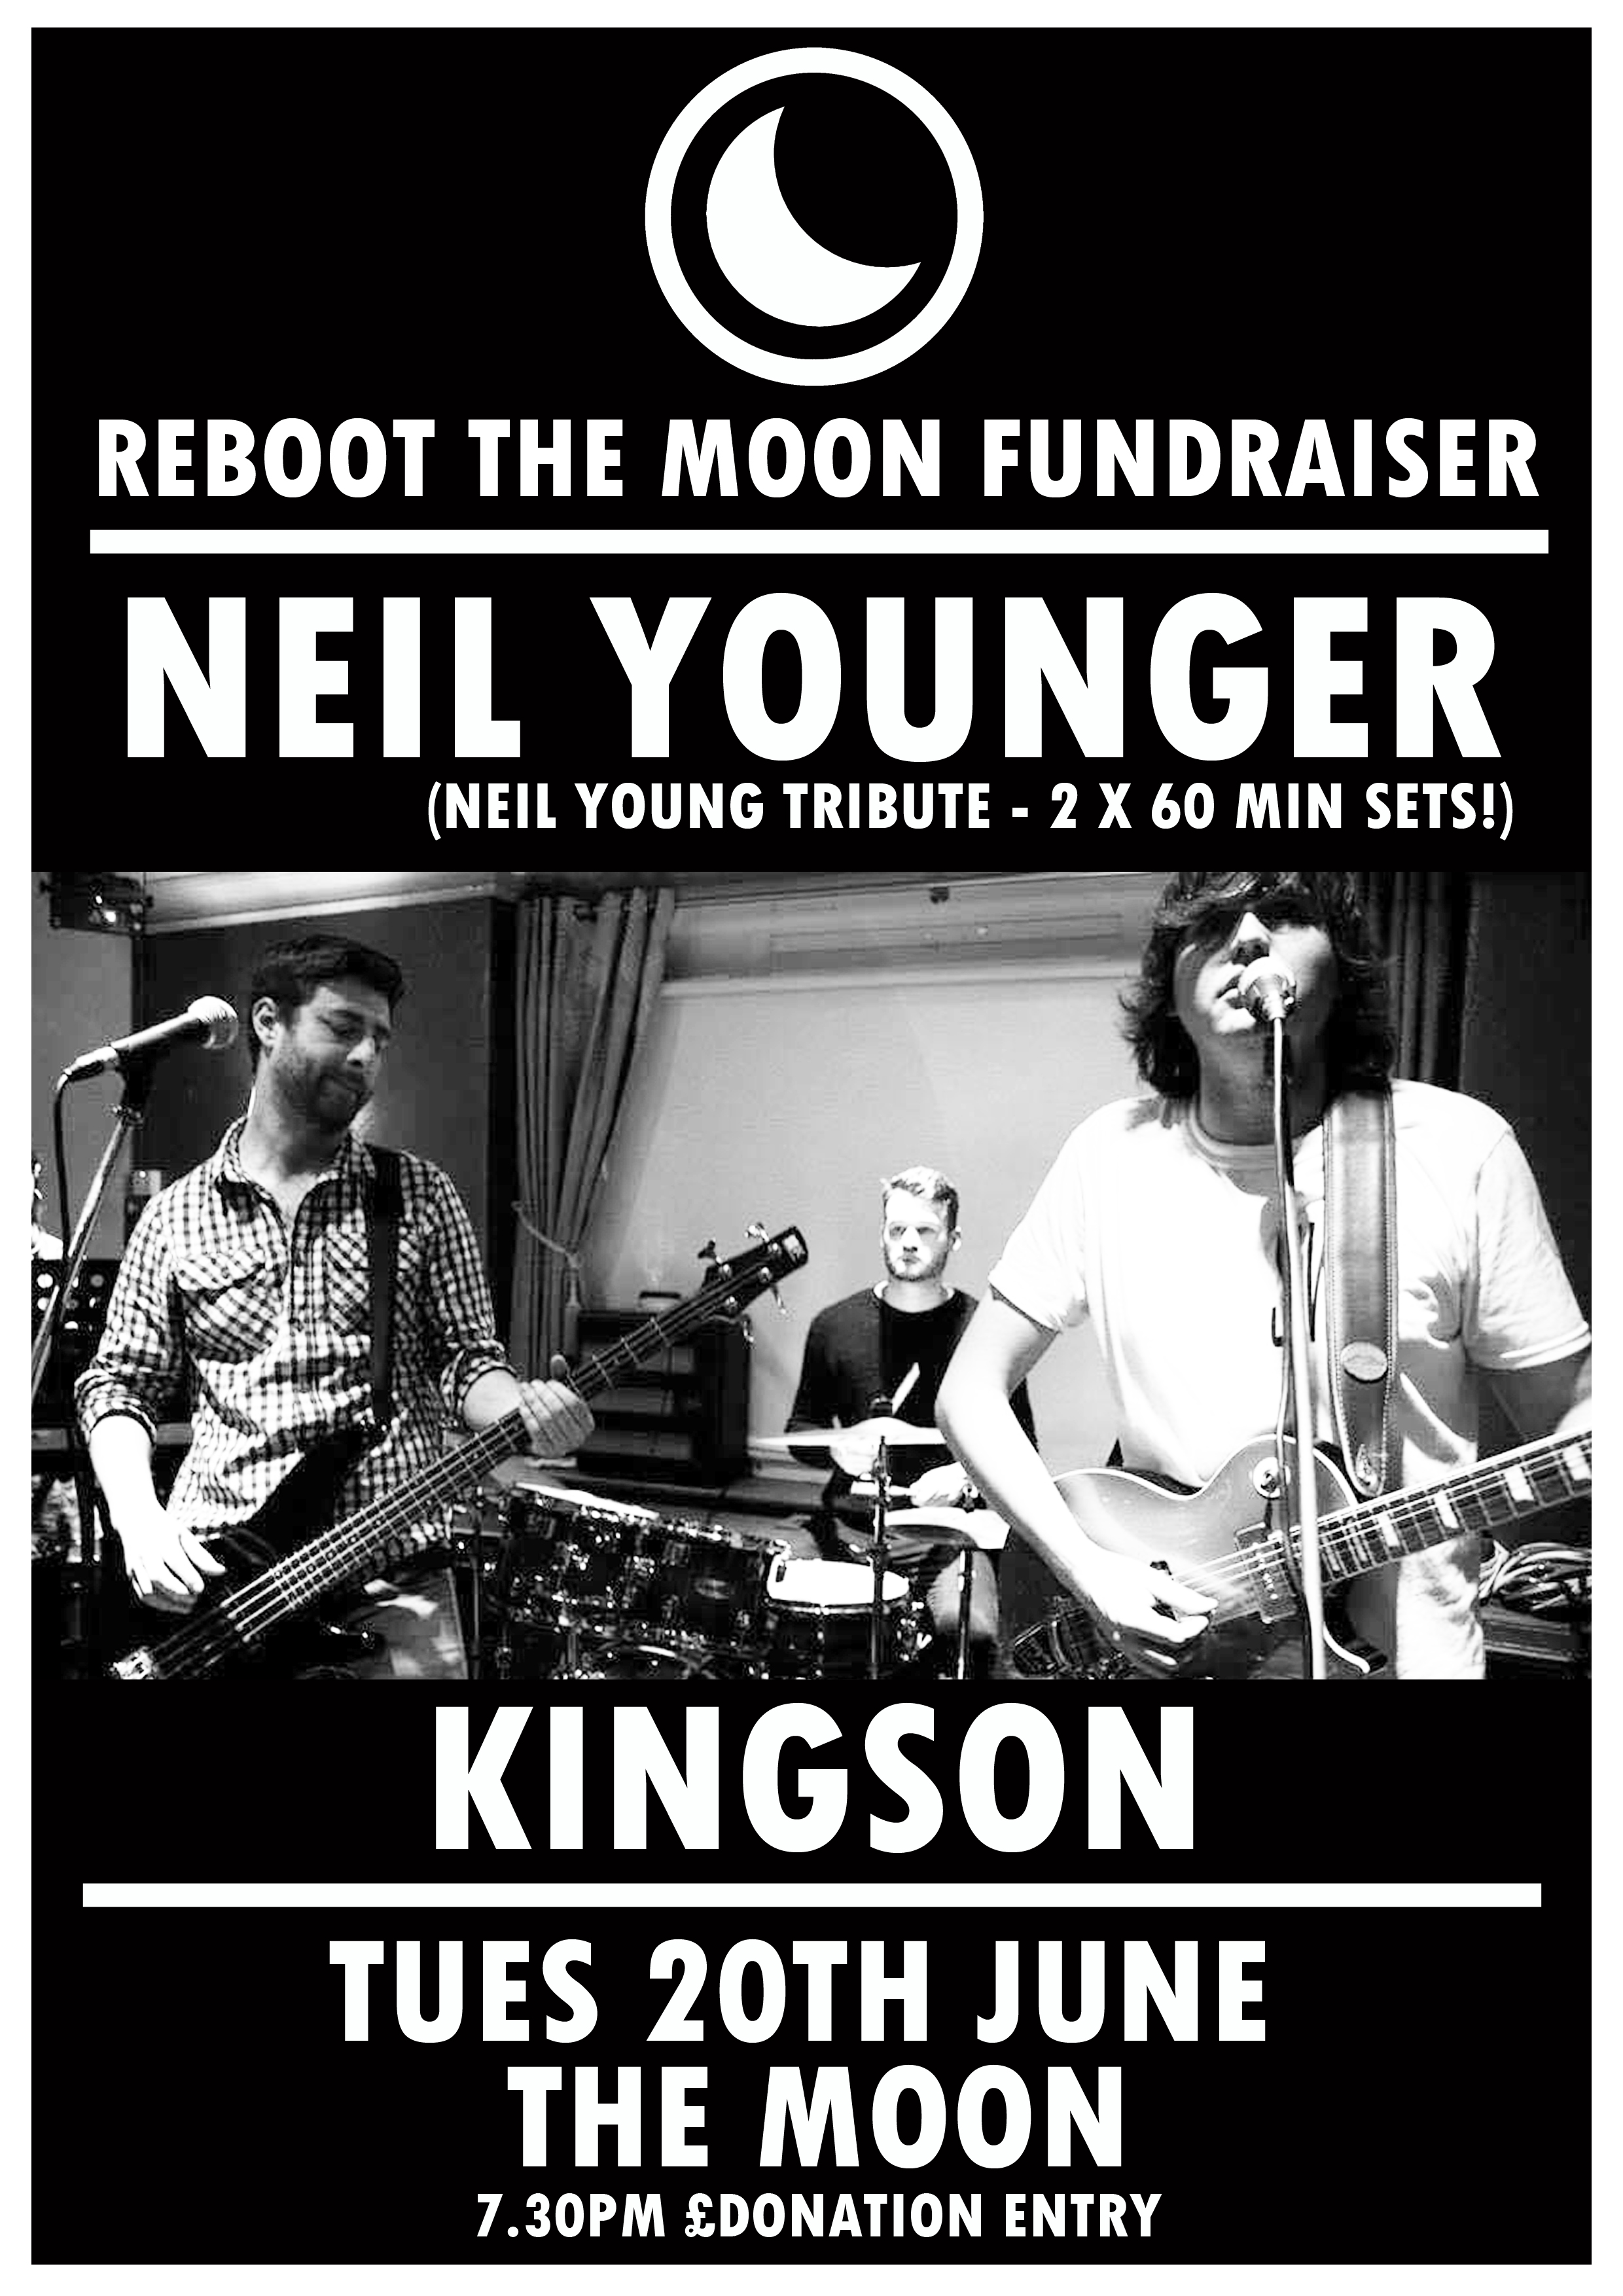 Reboot The Moon Fundraiser: Neil Younger